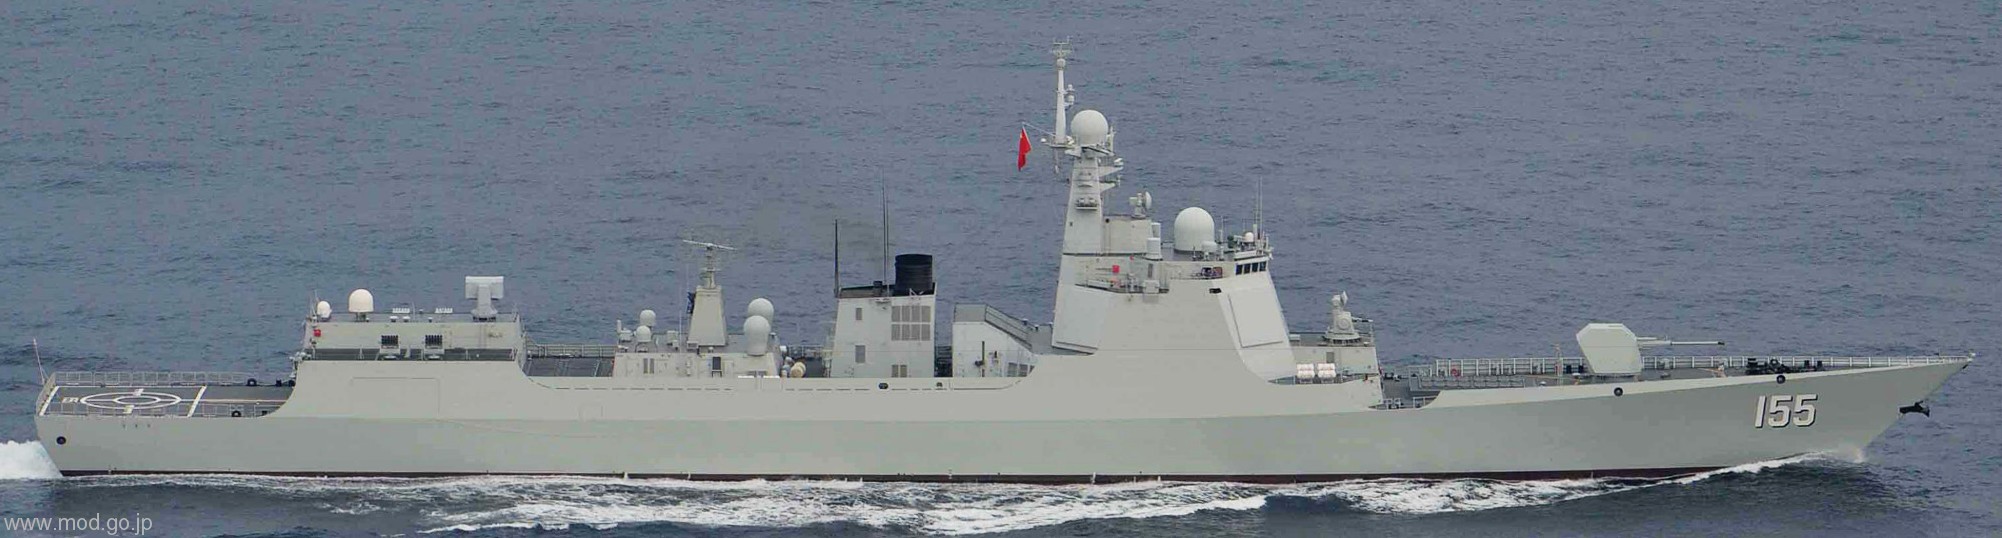 ddg-155 plans nanjing type 052d luyang class guided missile destroyer ddg china people's liberation army navy 02